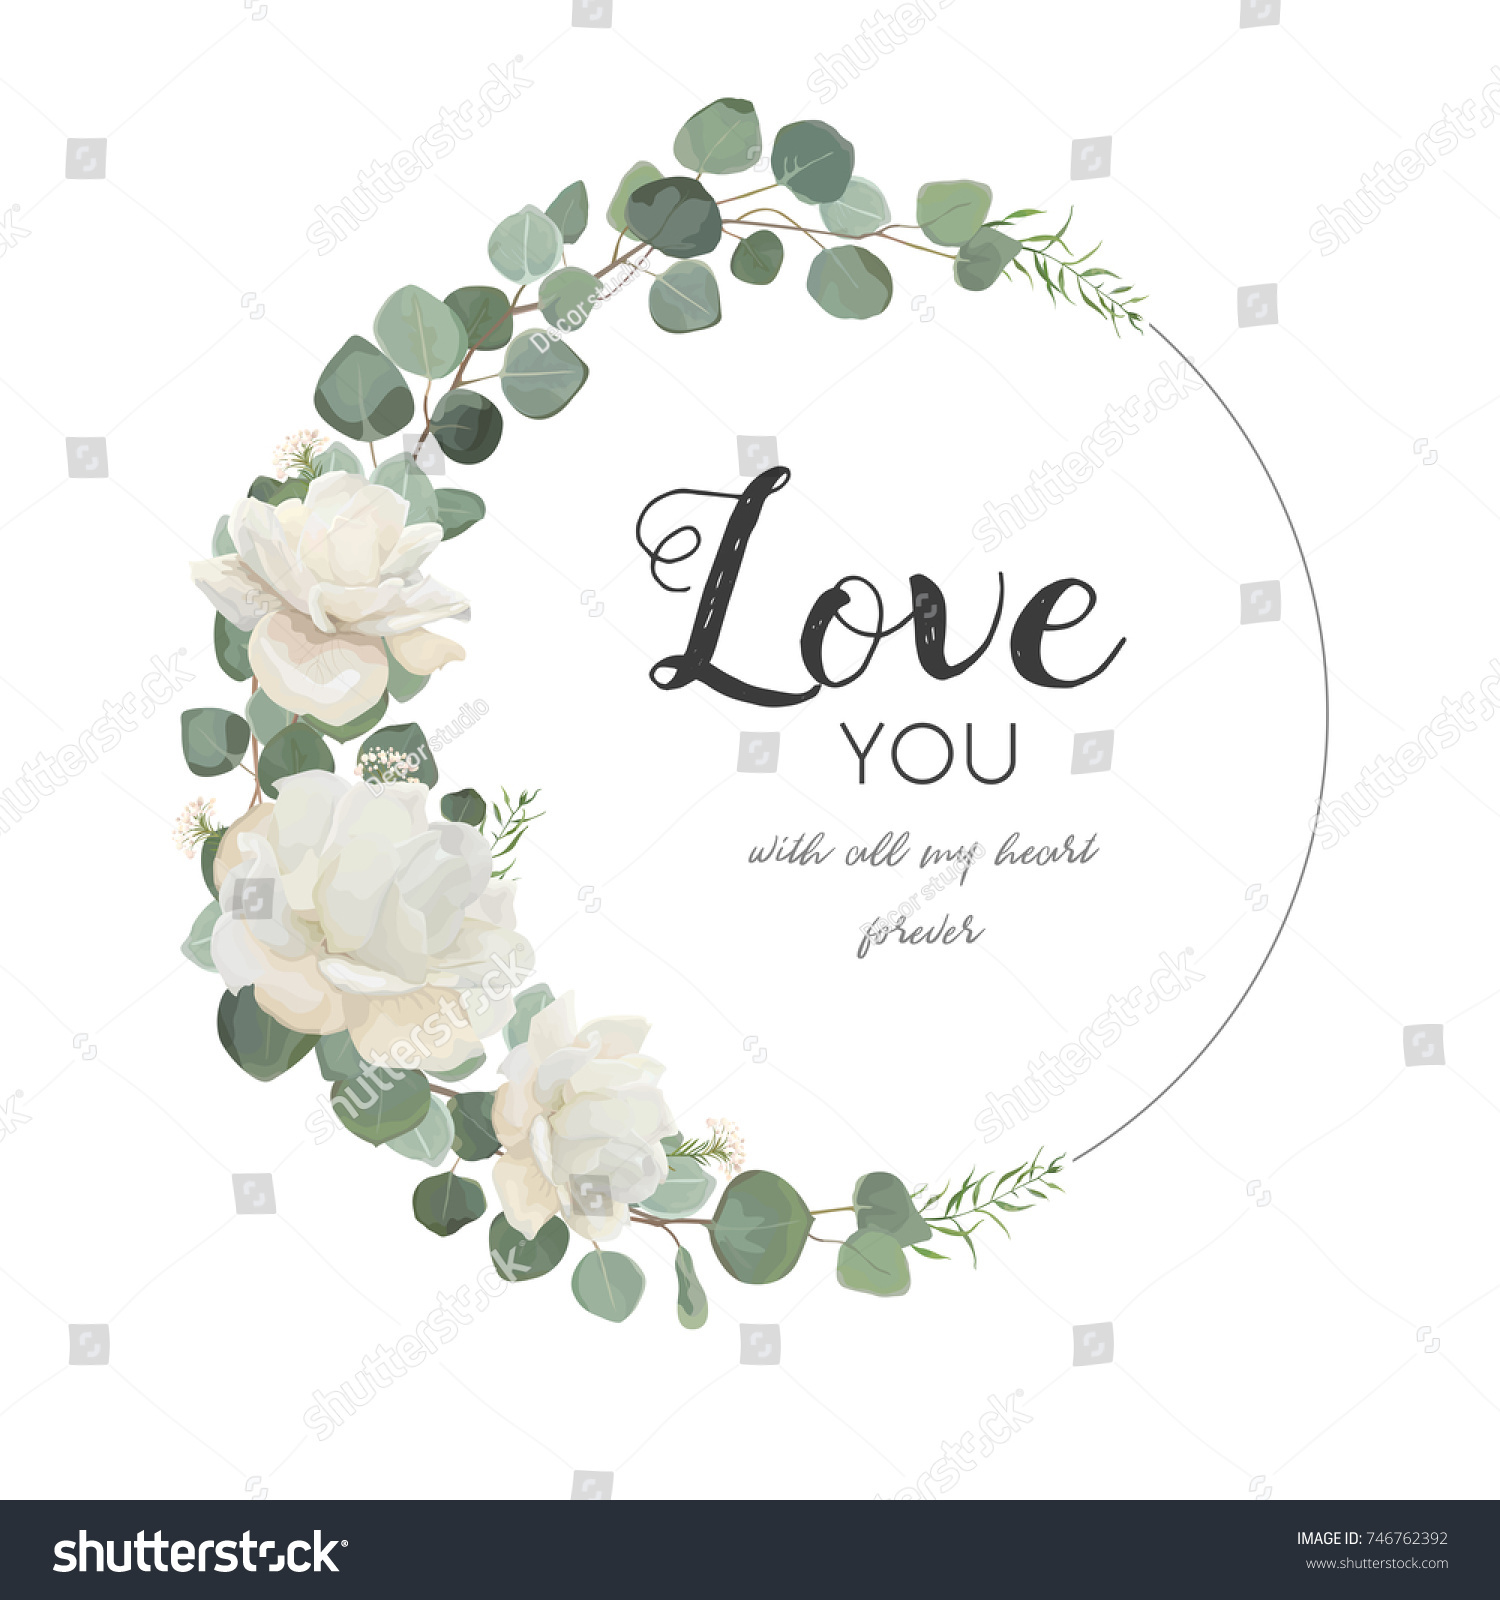 SVG of Vector floral design card. White Rose cute flower Eucalyptus branch with leaves & greenery mix round wreath. Greeting, wedding invite template.Round frame border with Love you quote. Tender copy space svg